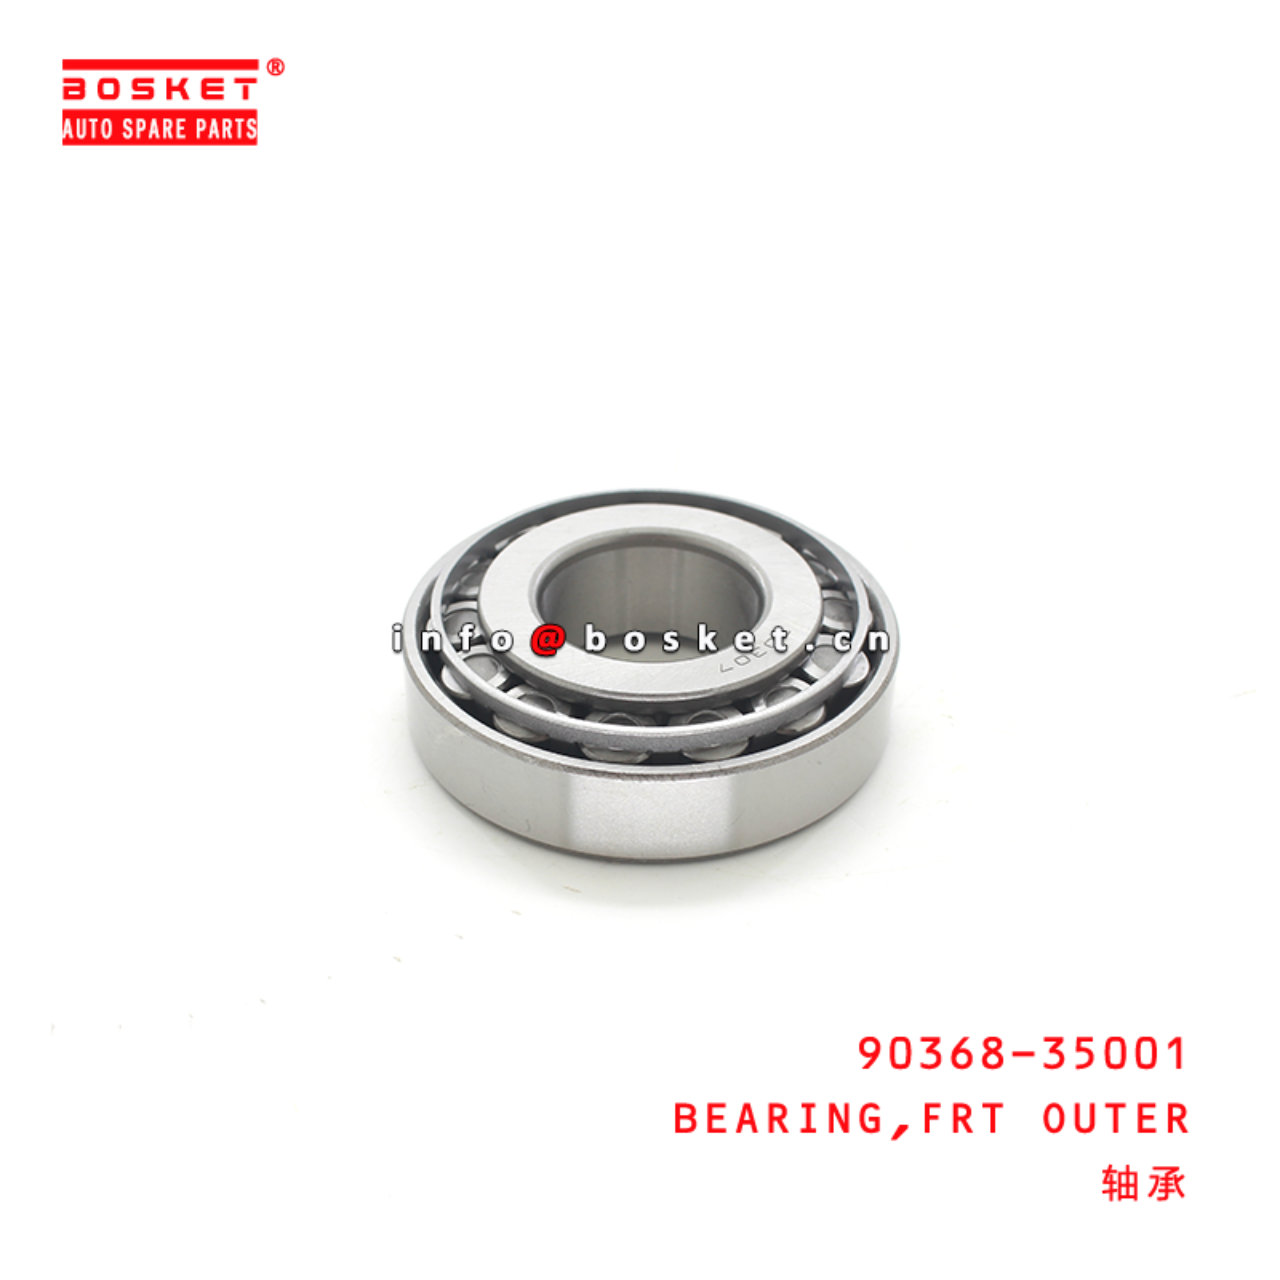 90368-35001 Front Outer Bearing Suitable for ISUZU HINO700